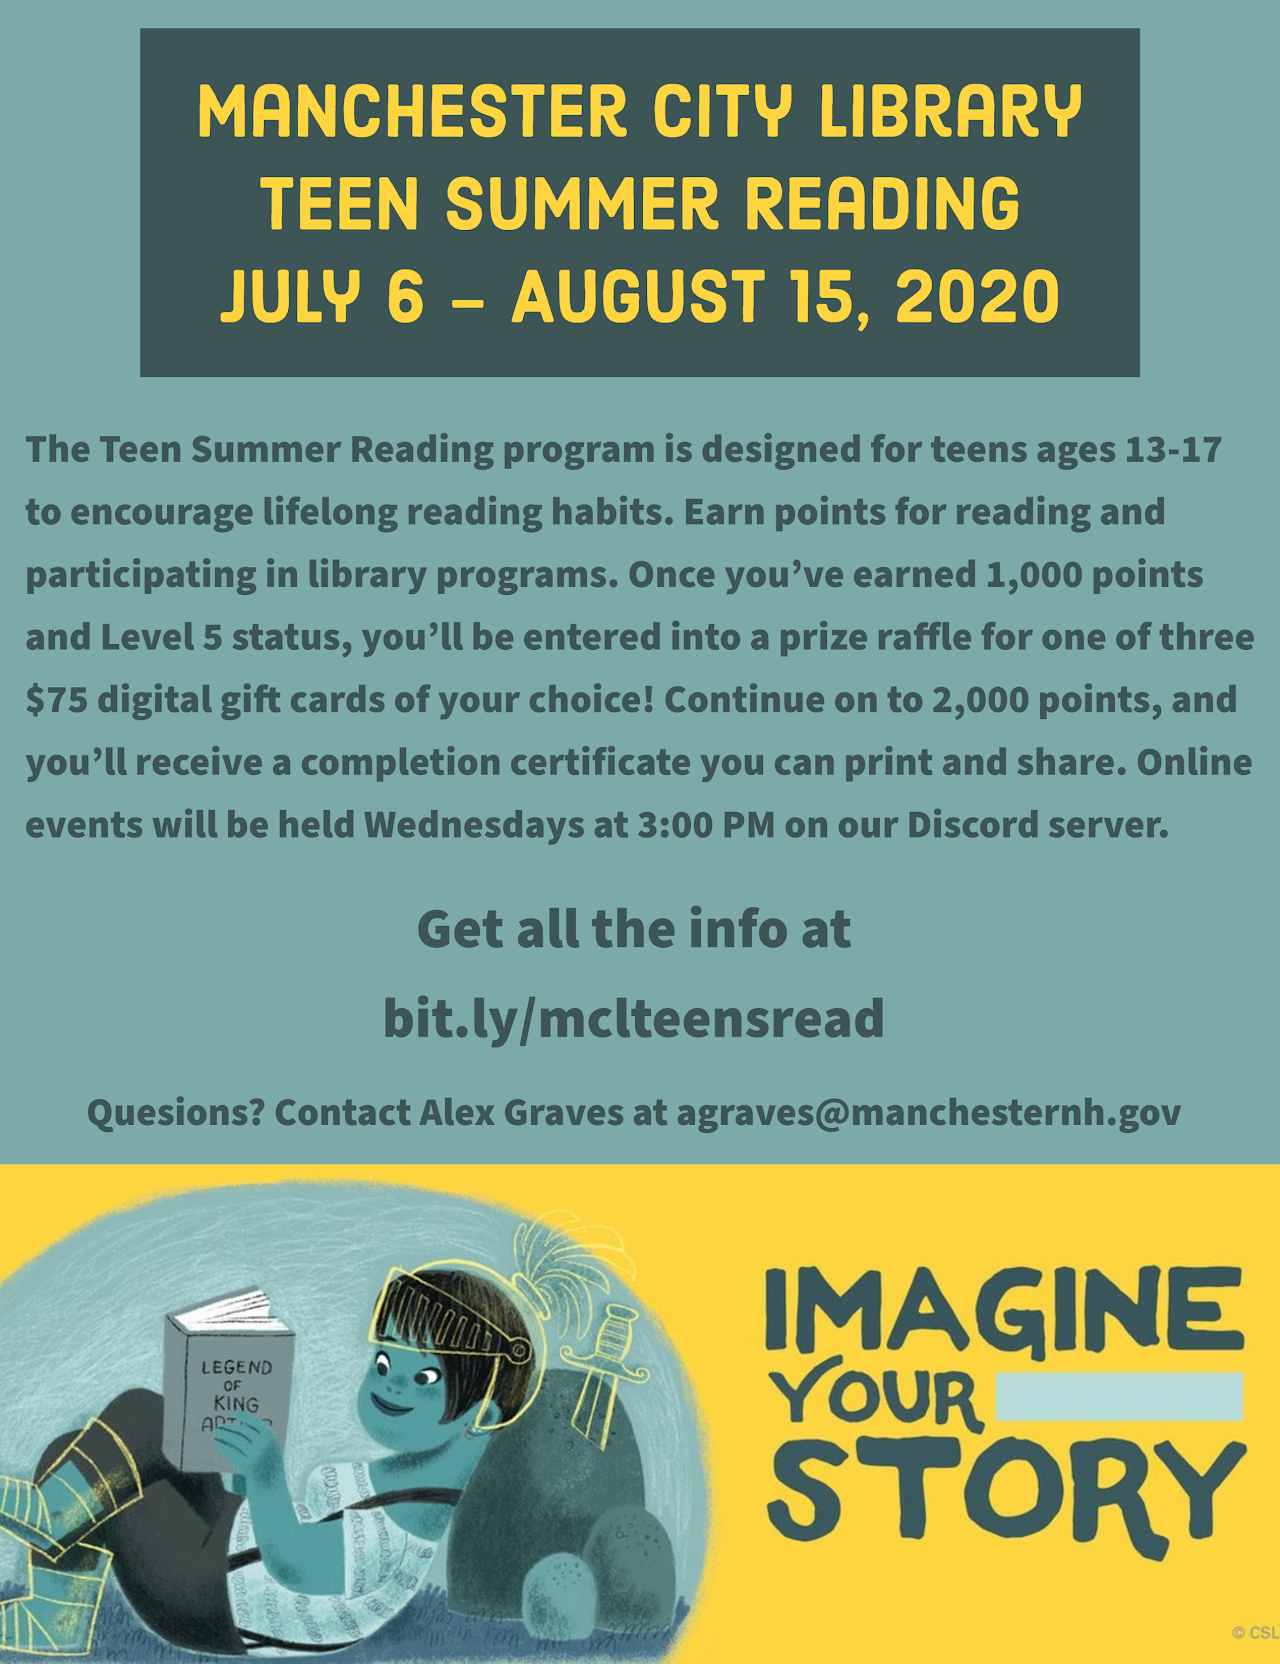 Manchester City Library Teen Summer Reading July 6 - August 15, 2020